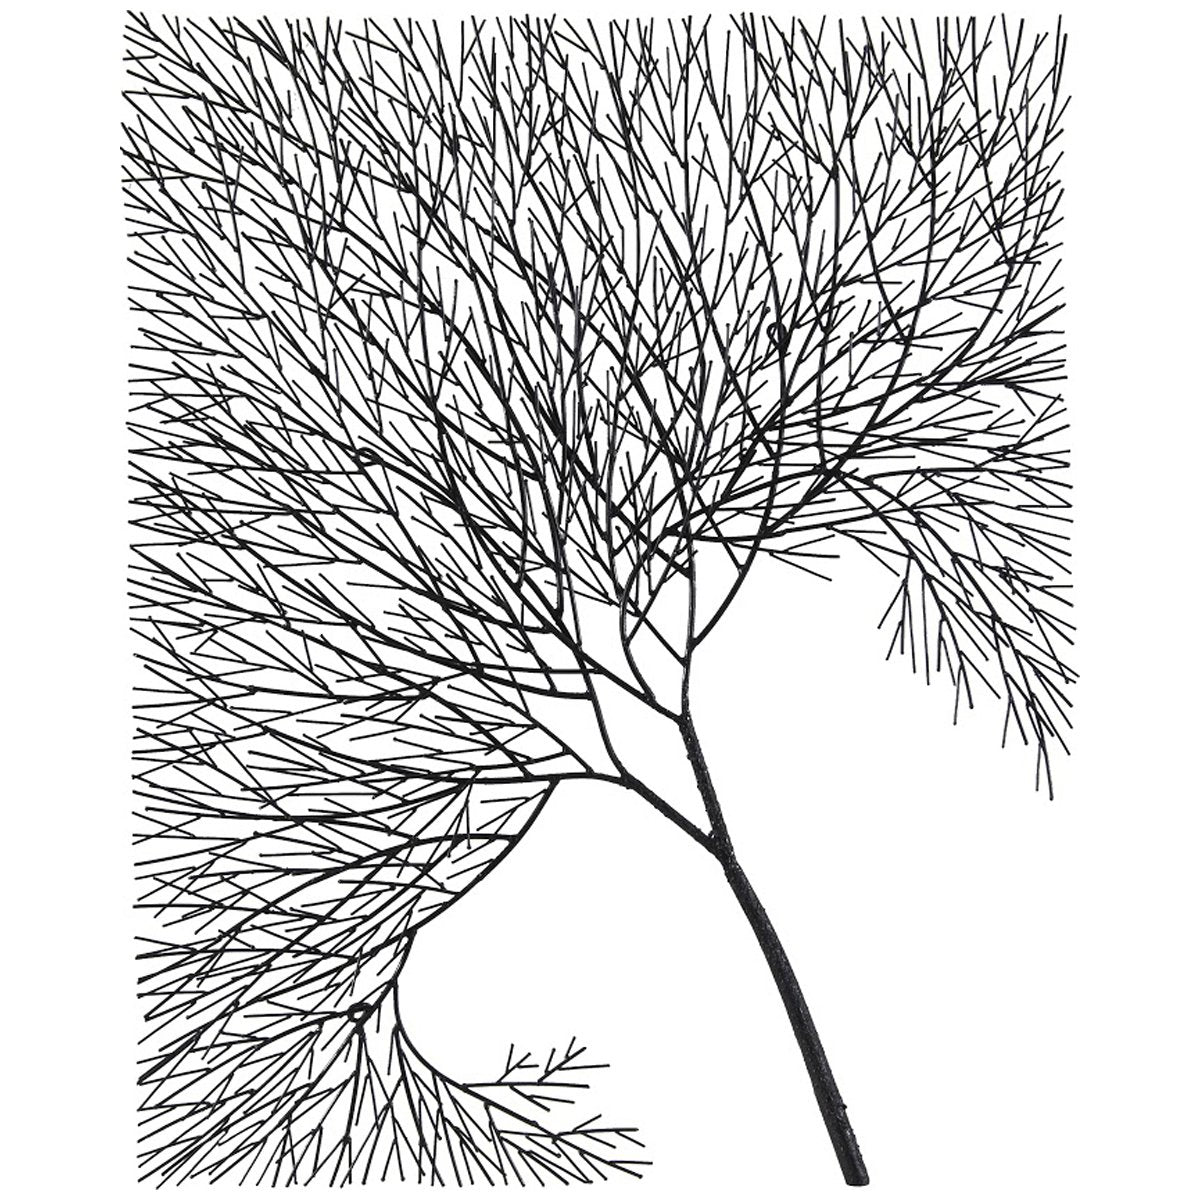 Phillips Collection Rectangular Wire Tree Wall Art